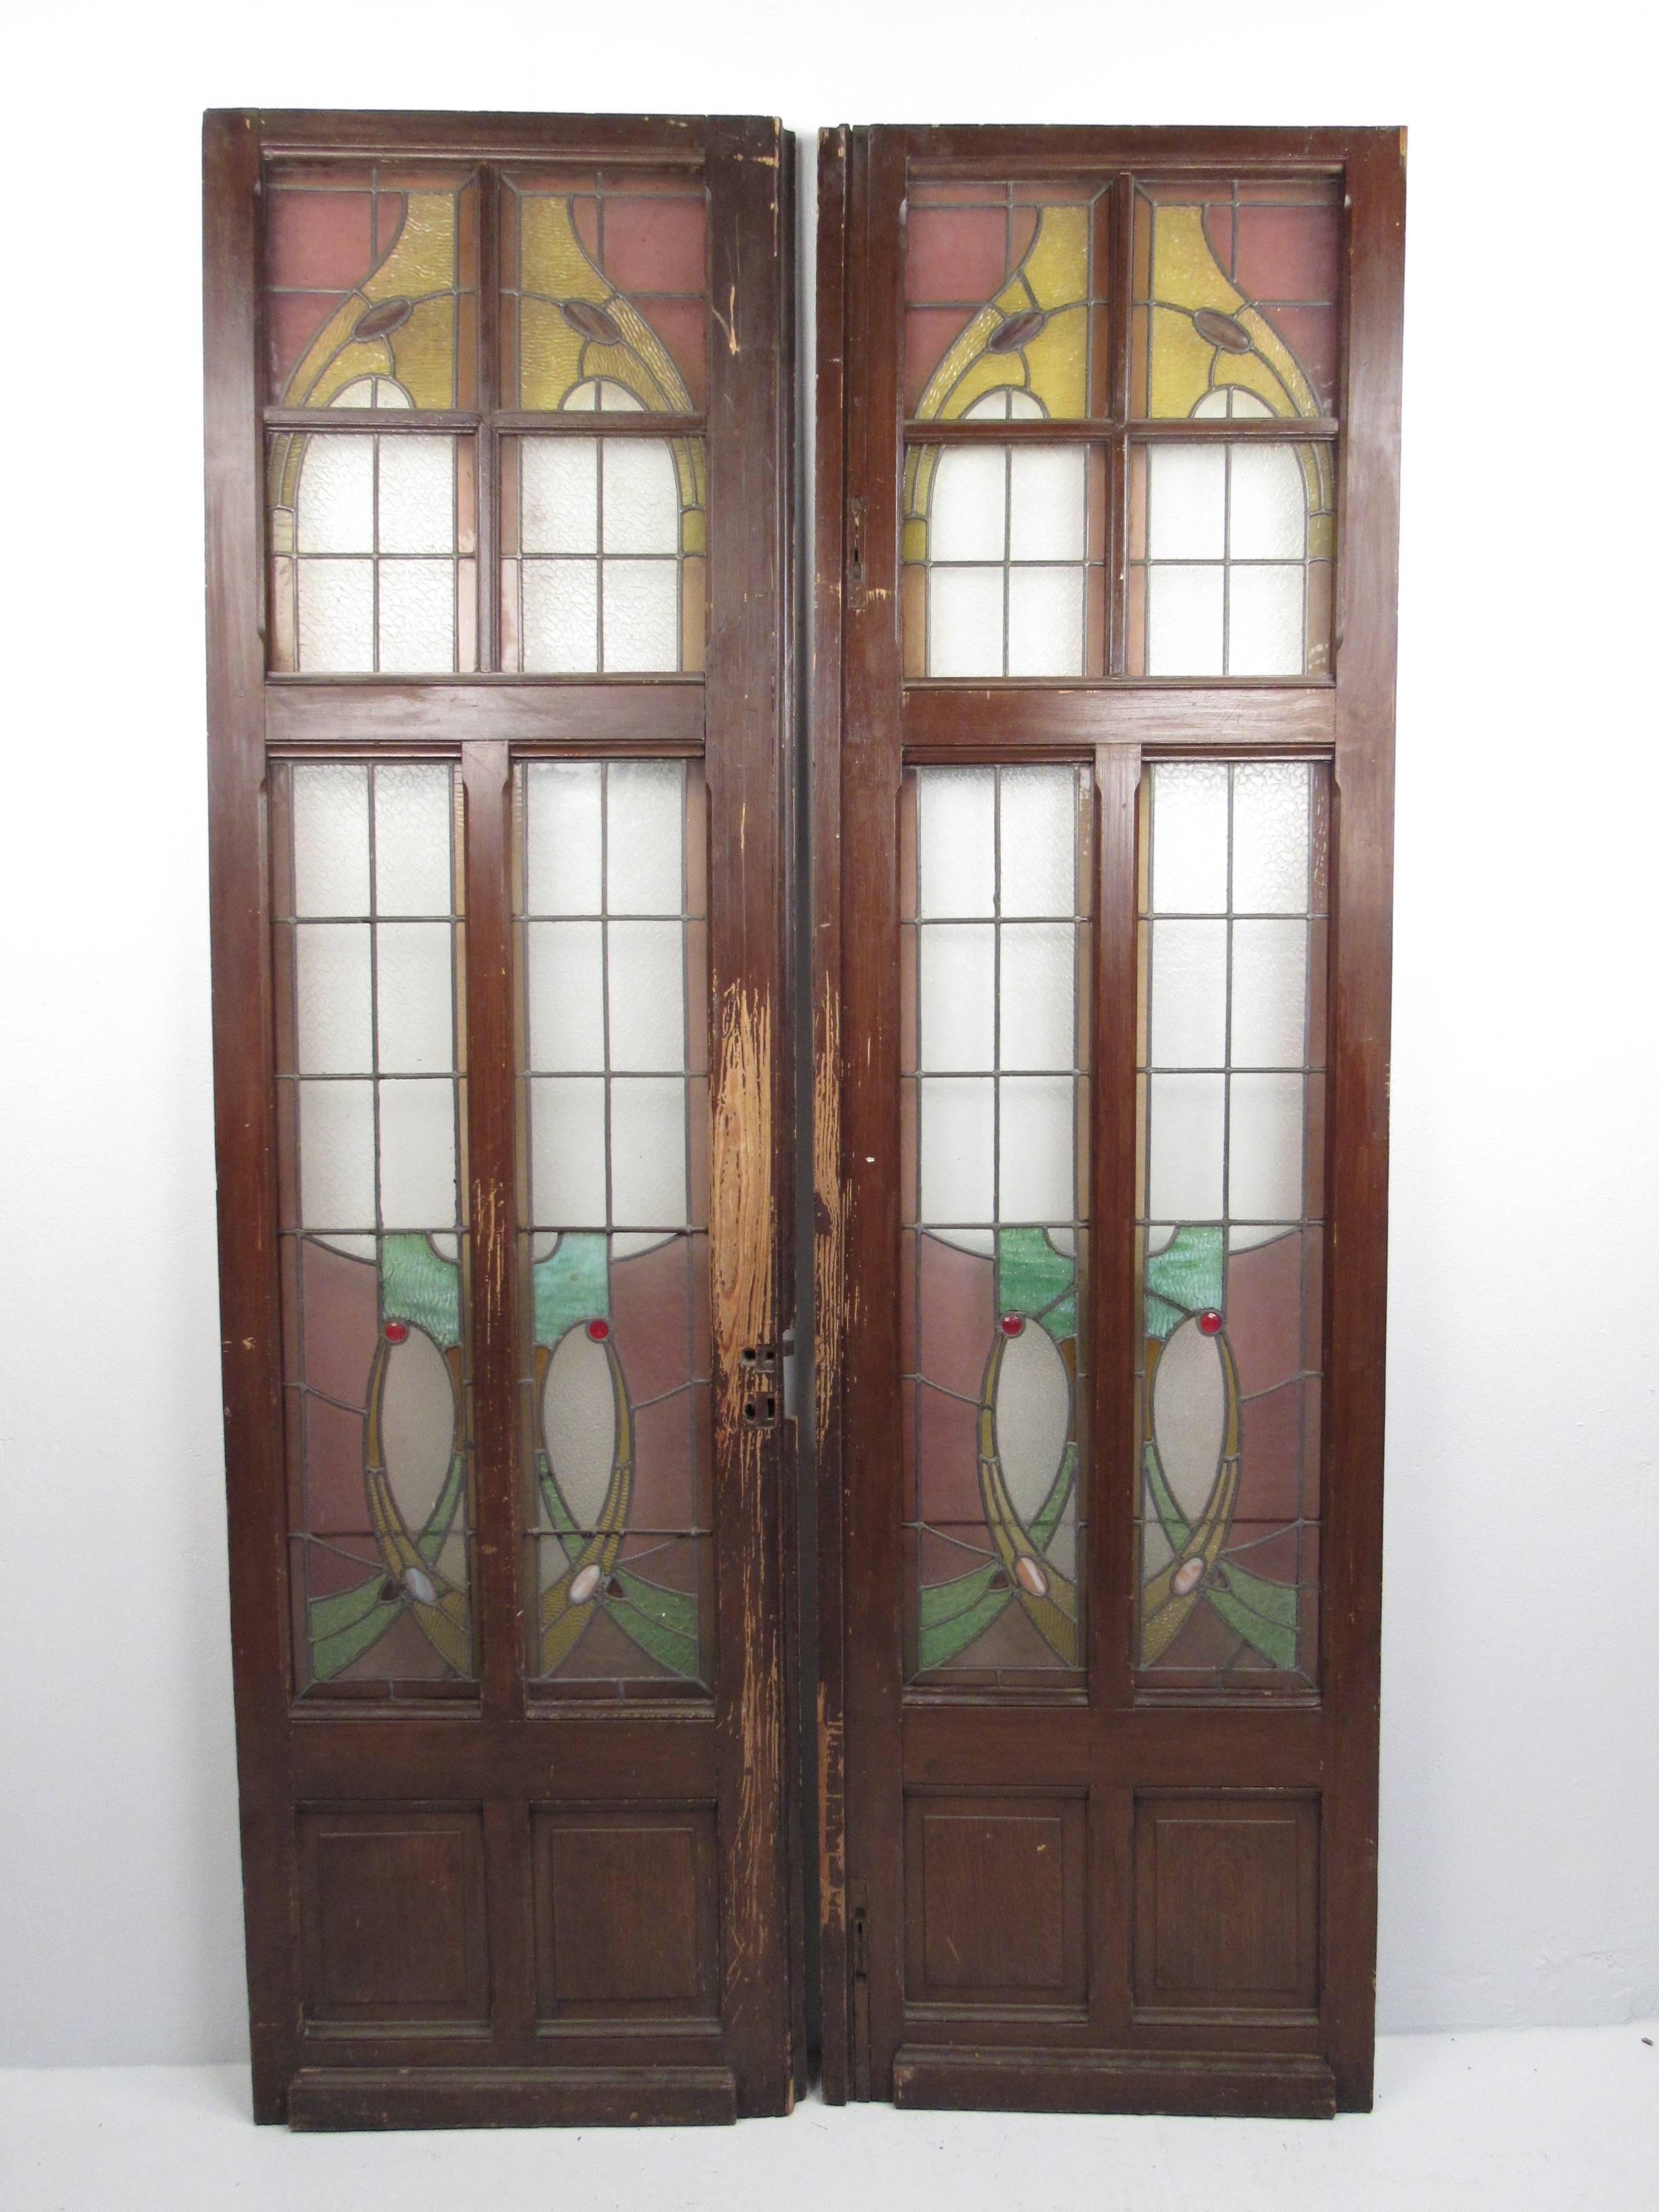 This exquisite matched pair of stained glass doors features hardwood frames with beautiful stained glass window panes. Perfect antique stained glass entry doors for home or shop use or display. Please confirm item location (NY or NJ).